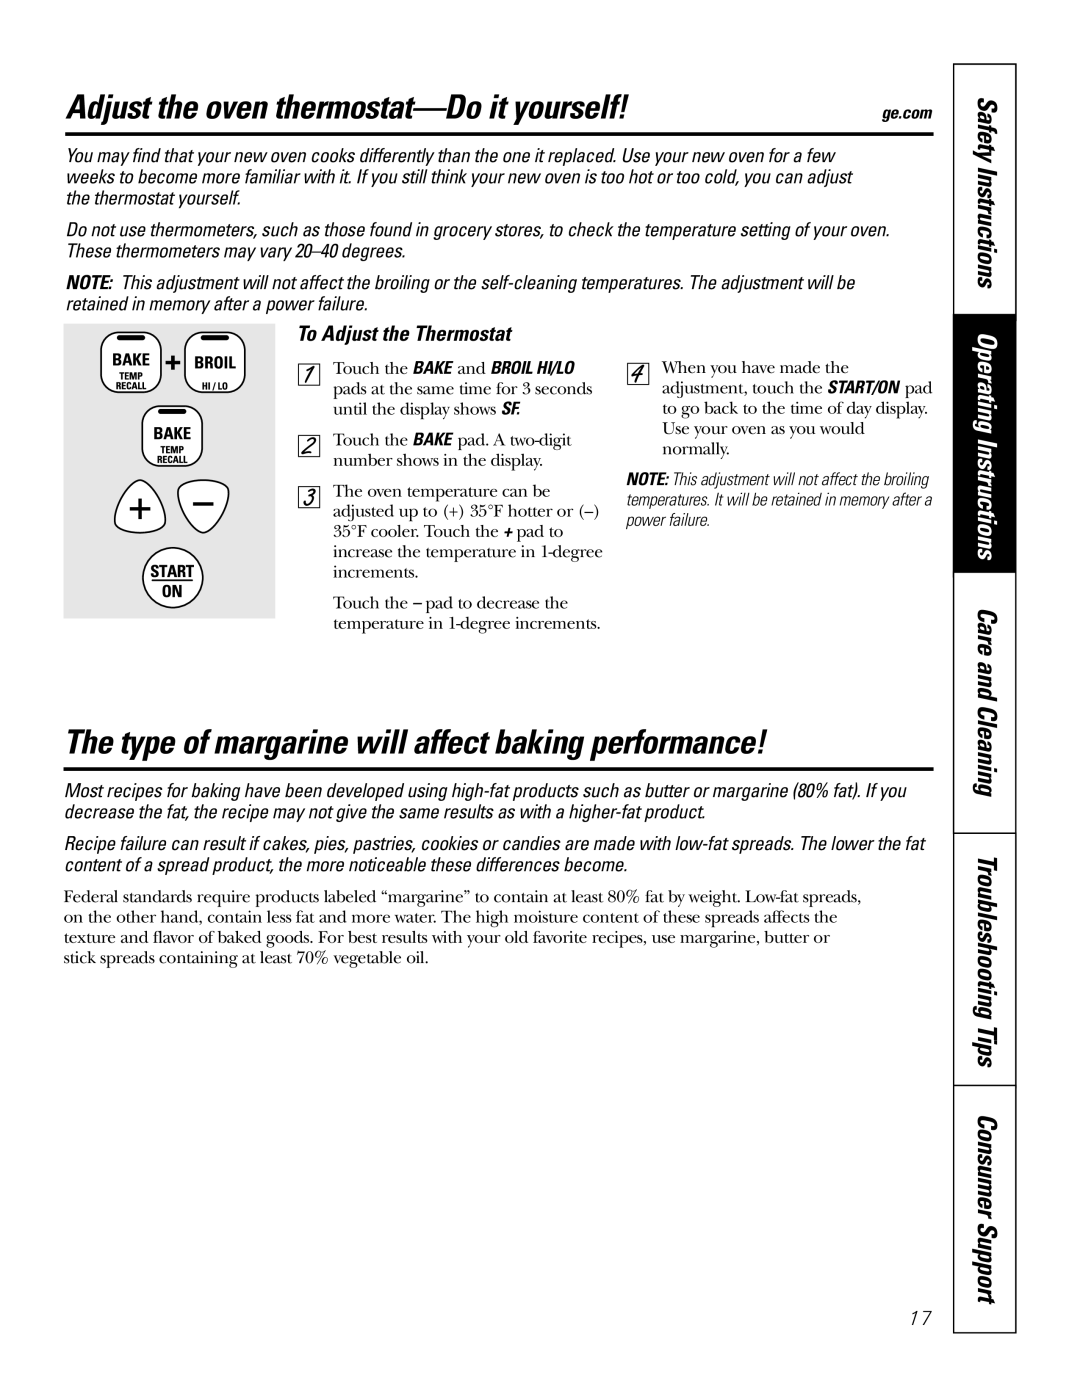 GE JBS55 owner manual Adjust the oven thermostat-Do it yourself, The type of margarine will affect baking performance 